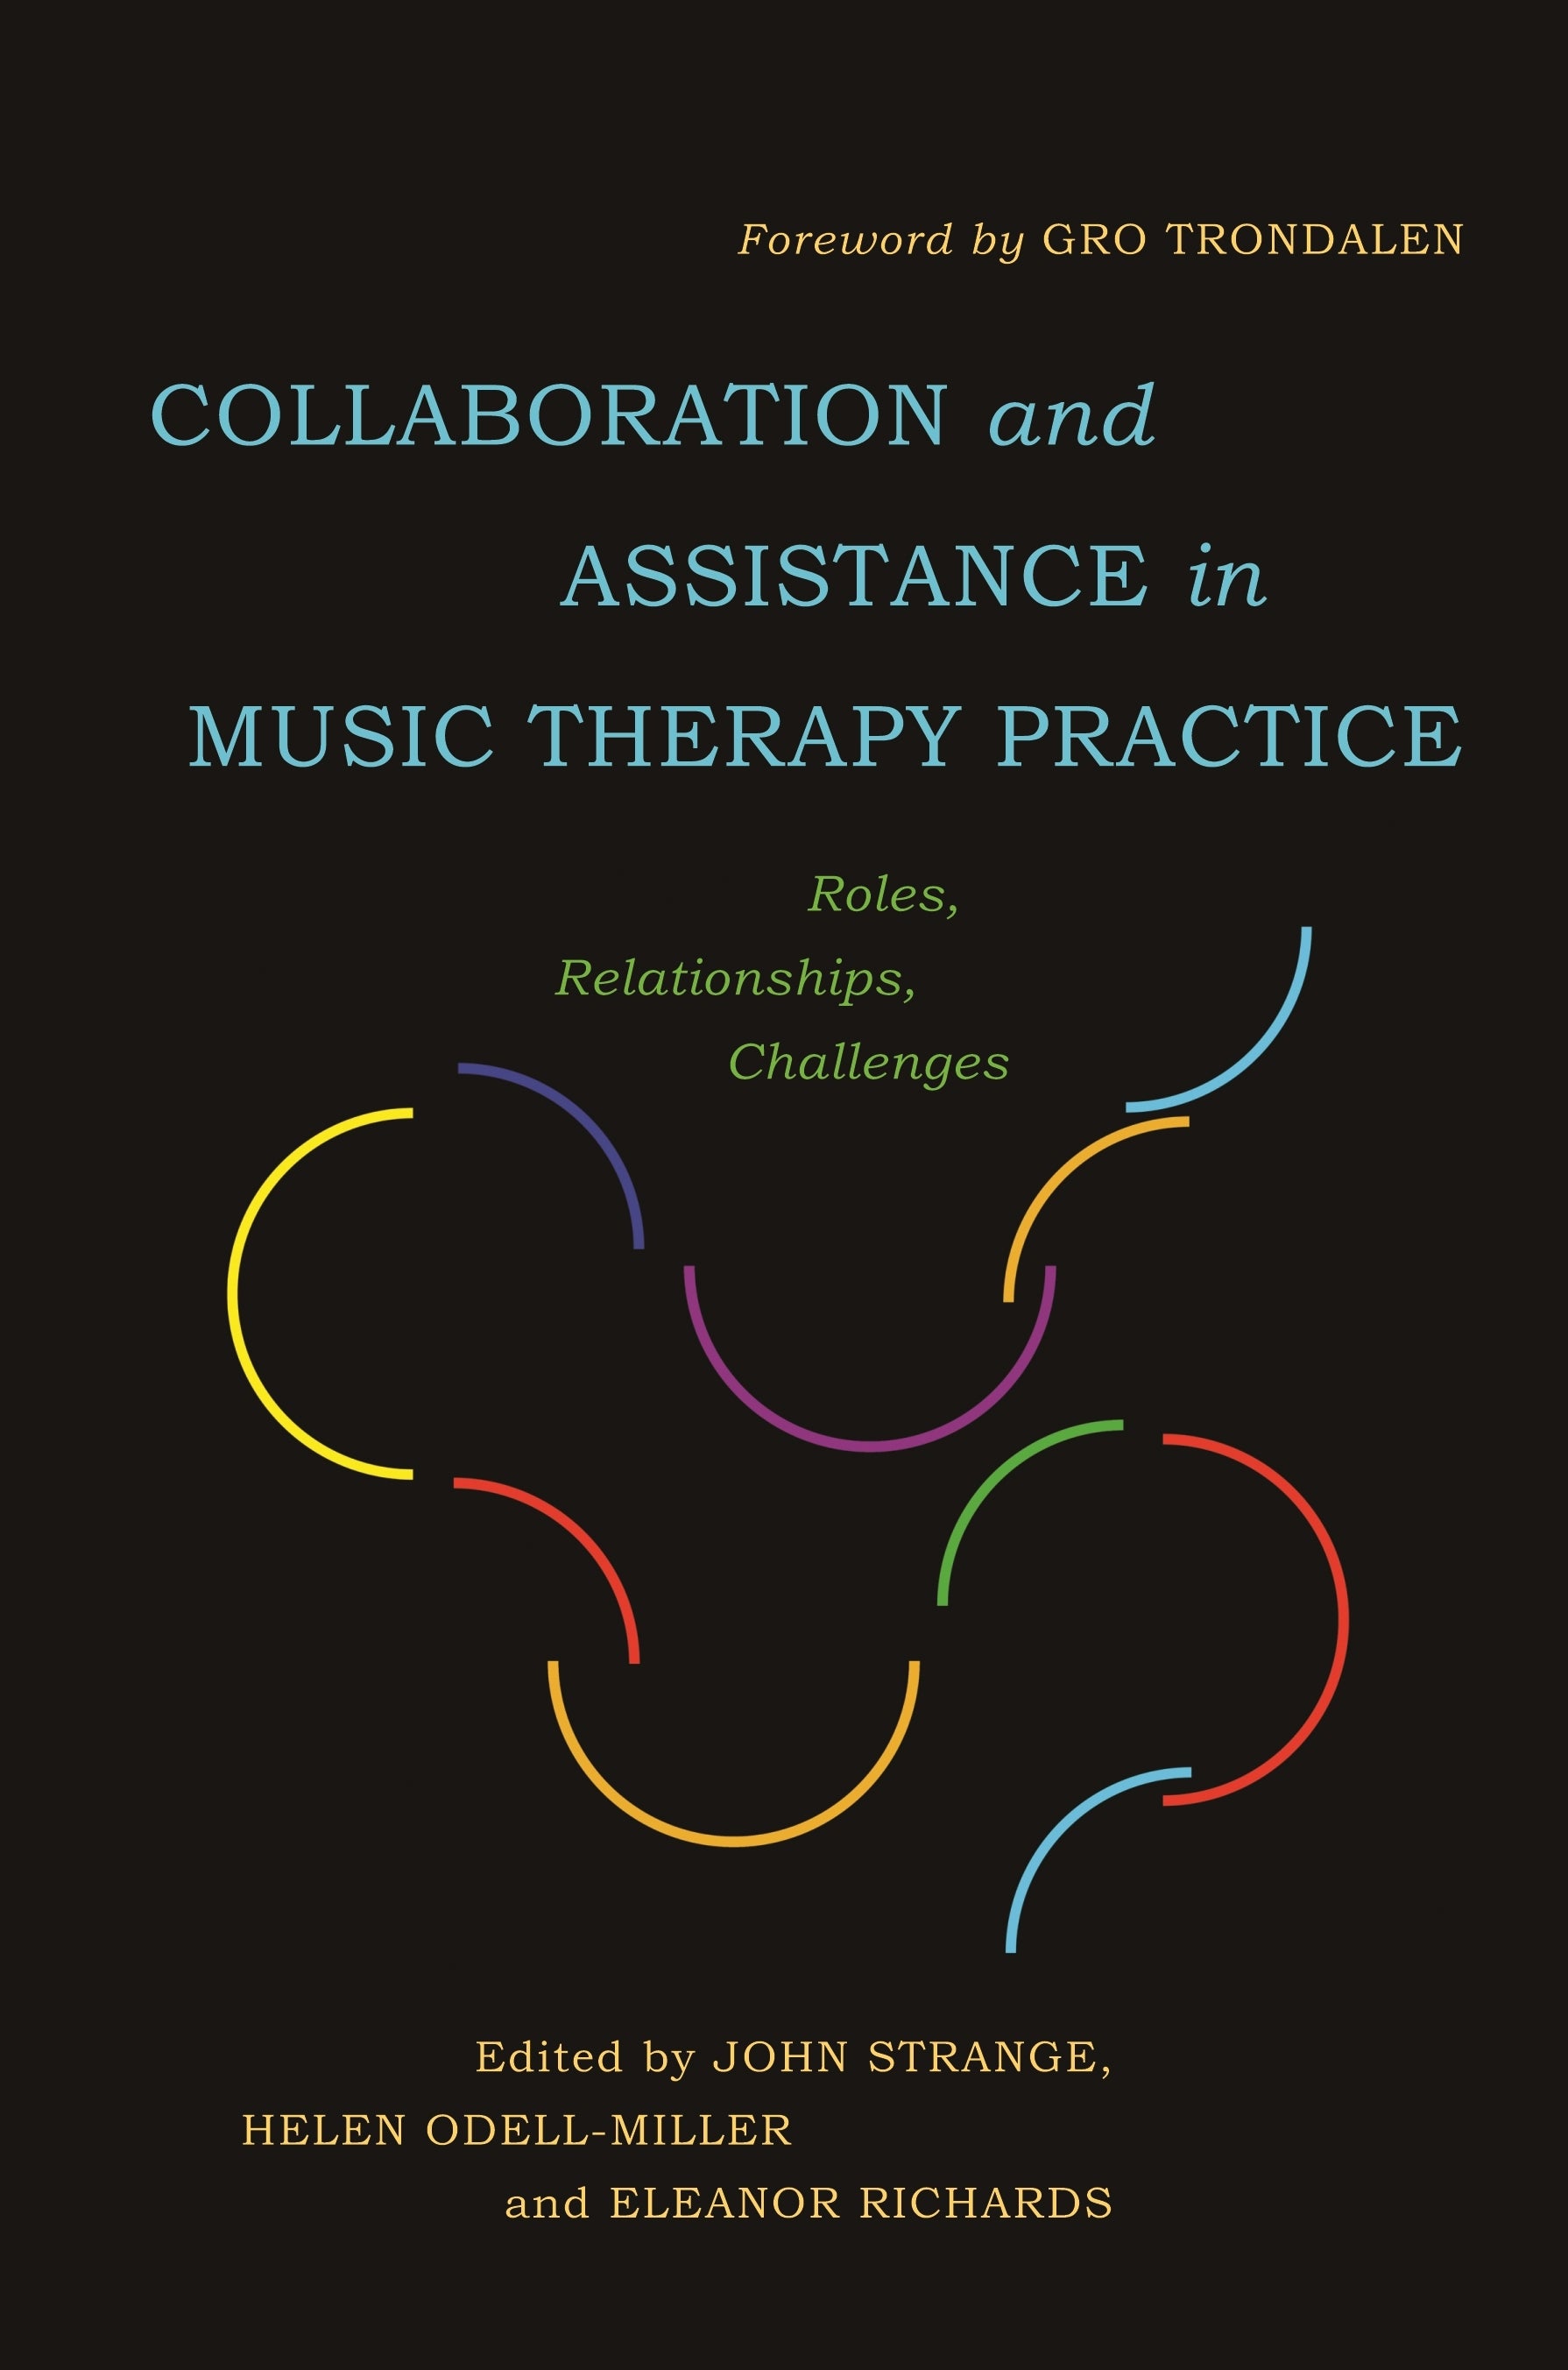 Collaboration and Assistance in Music Therapy Practice by No Author Listed, Helen Odell-Miller, Eleanor Richards, Gro Trondalen, John Strange